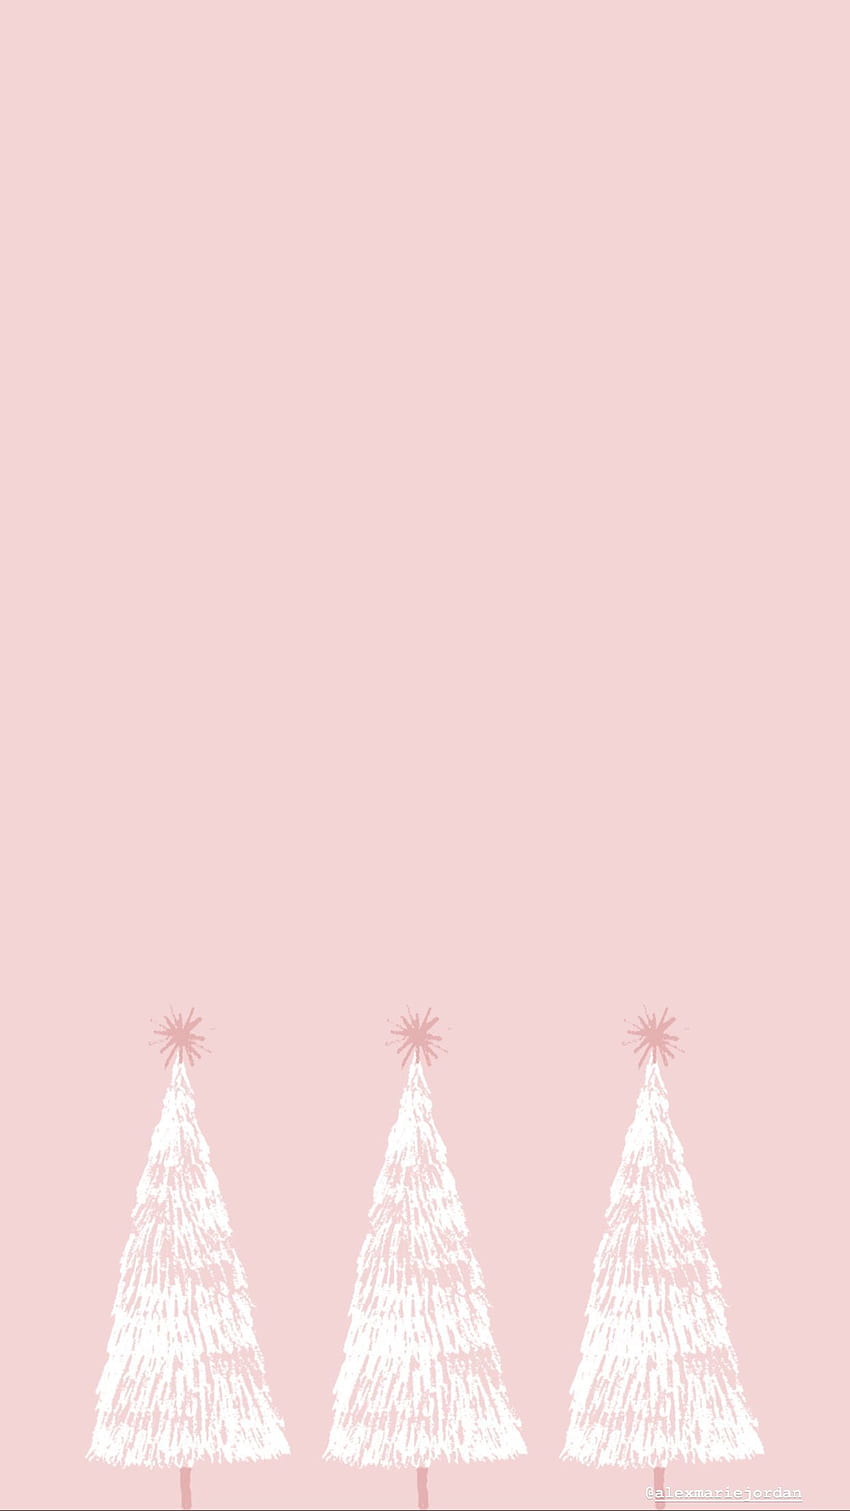 Three white Christmas trees on a pink background - Cute Christmas